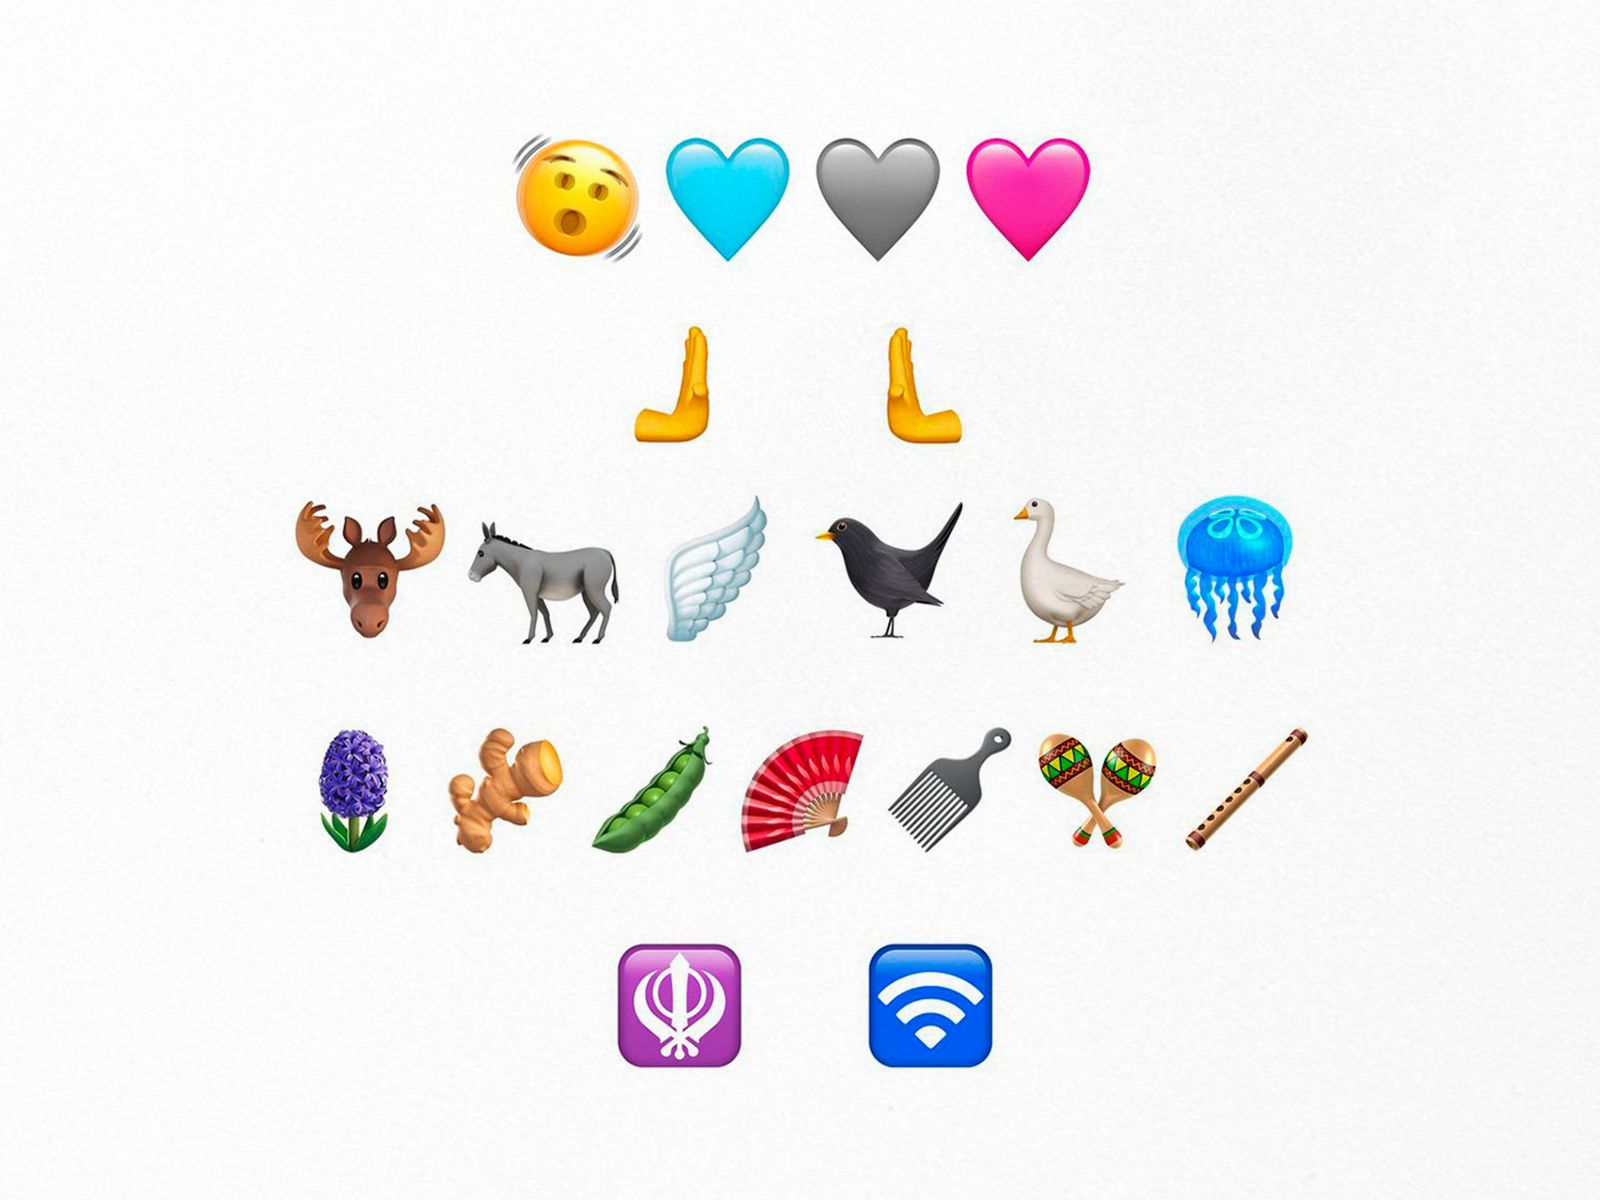 These are the new emojis that Apple will include in its next update